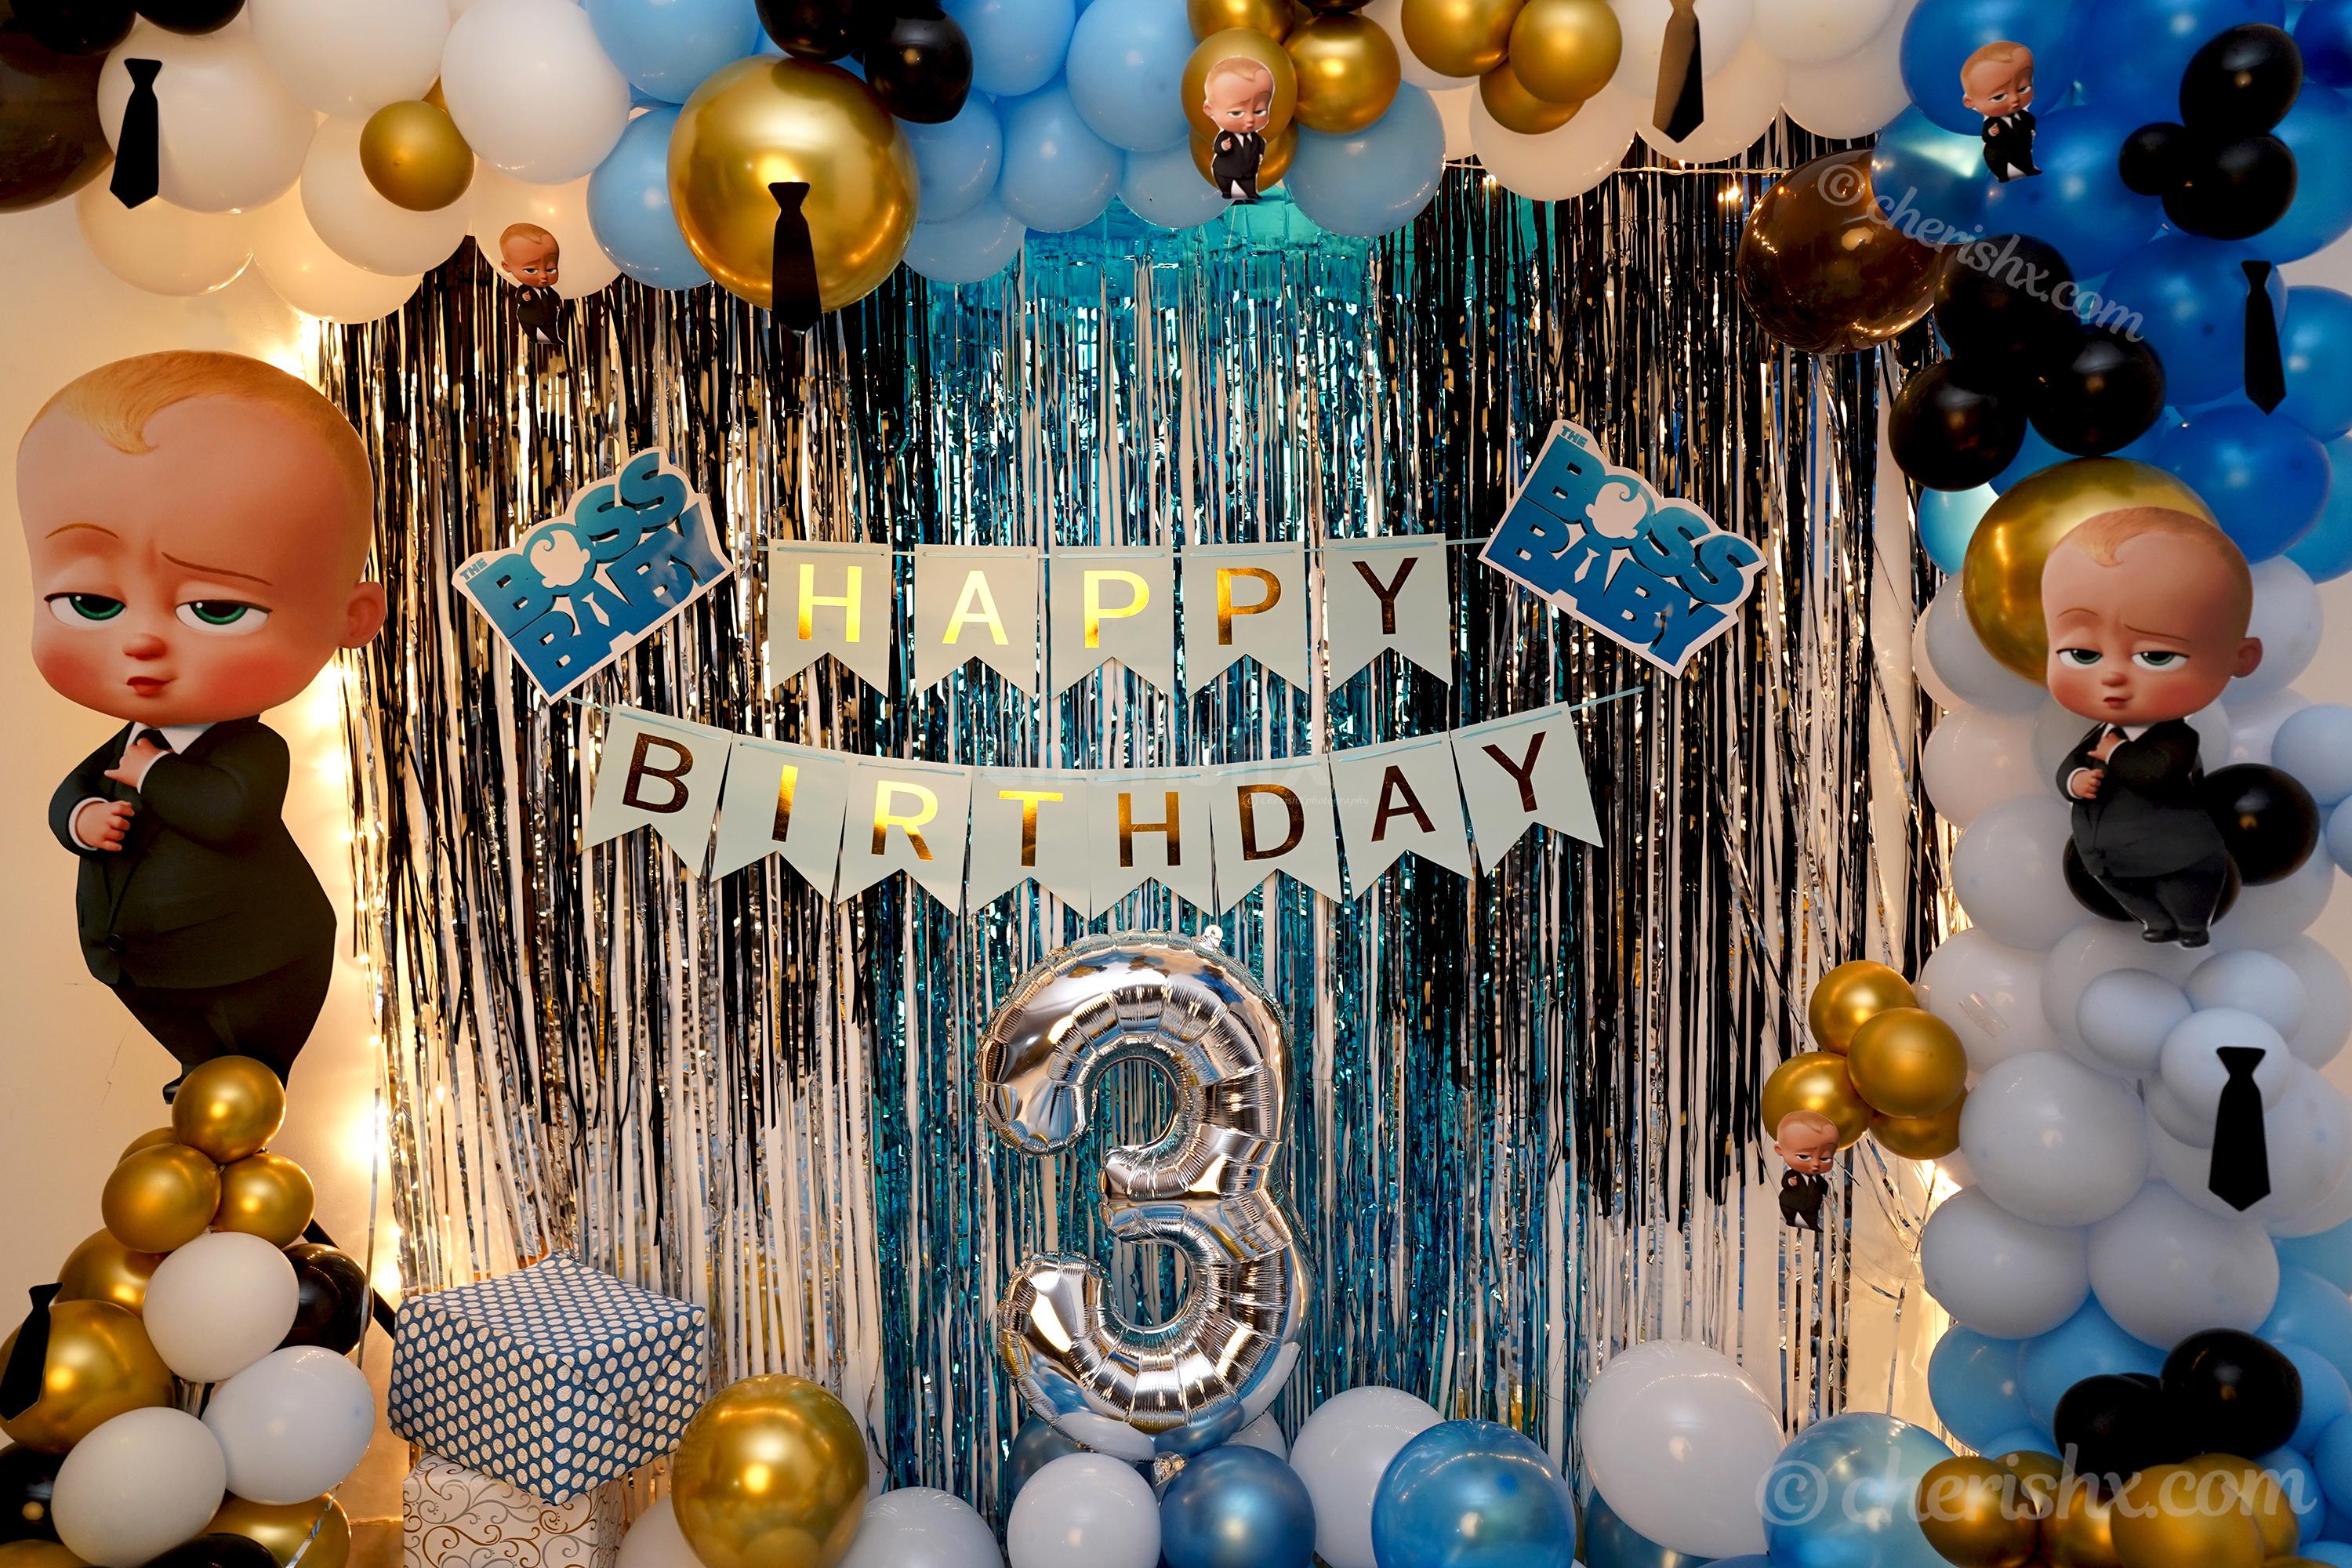 Let your child have a wonderful party by booking CherishX's Boss Baby Theme Decor